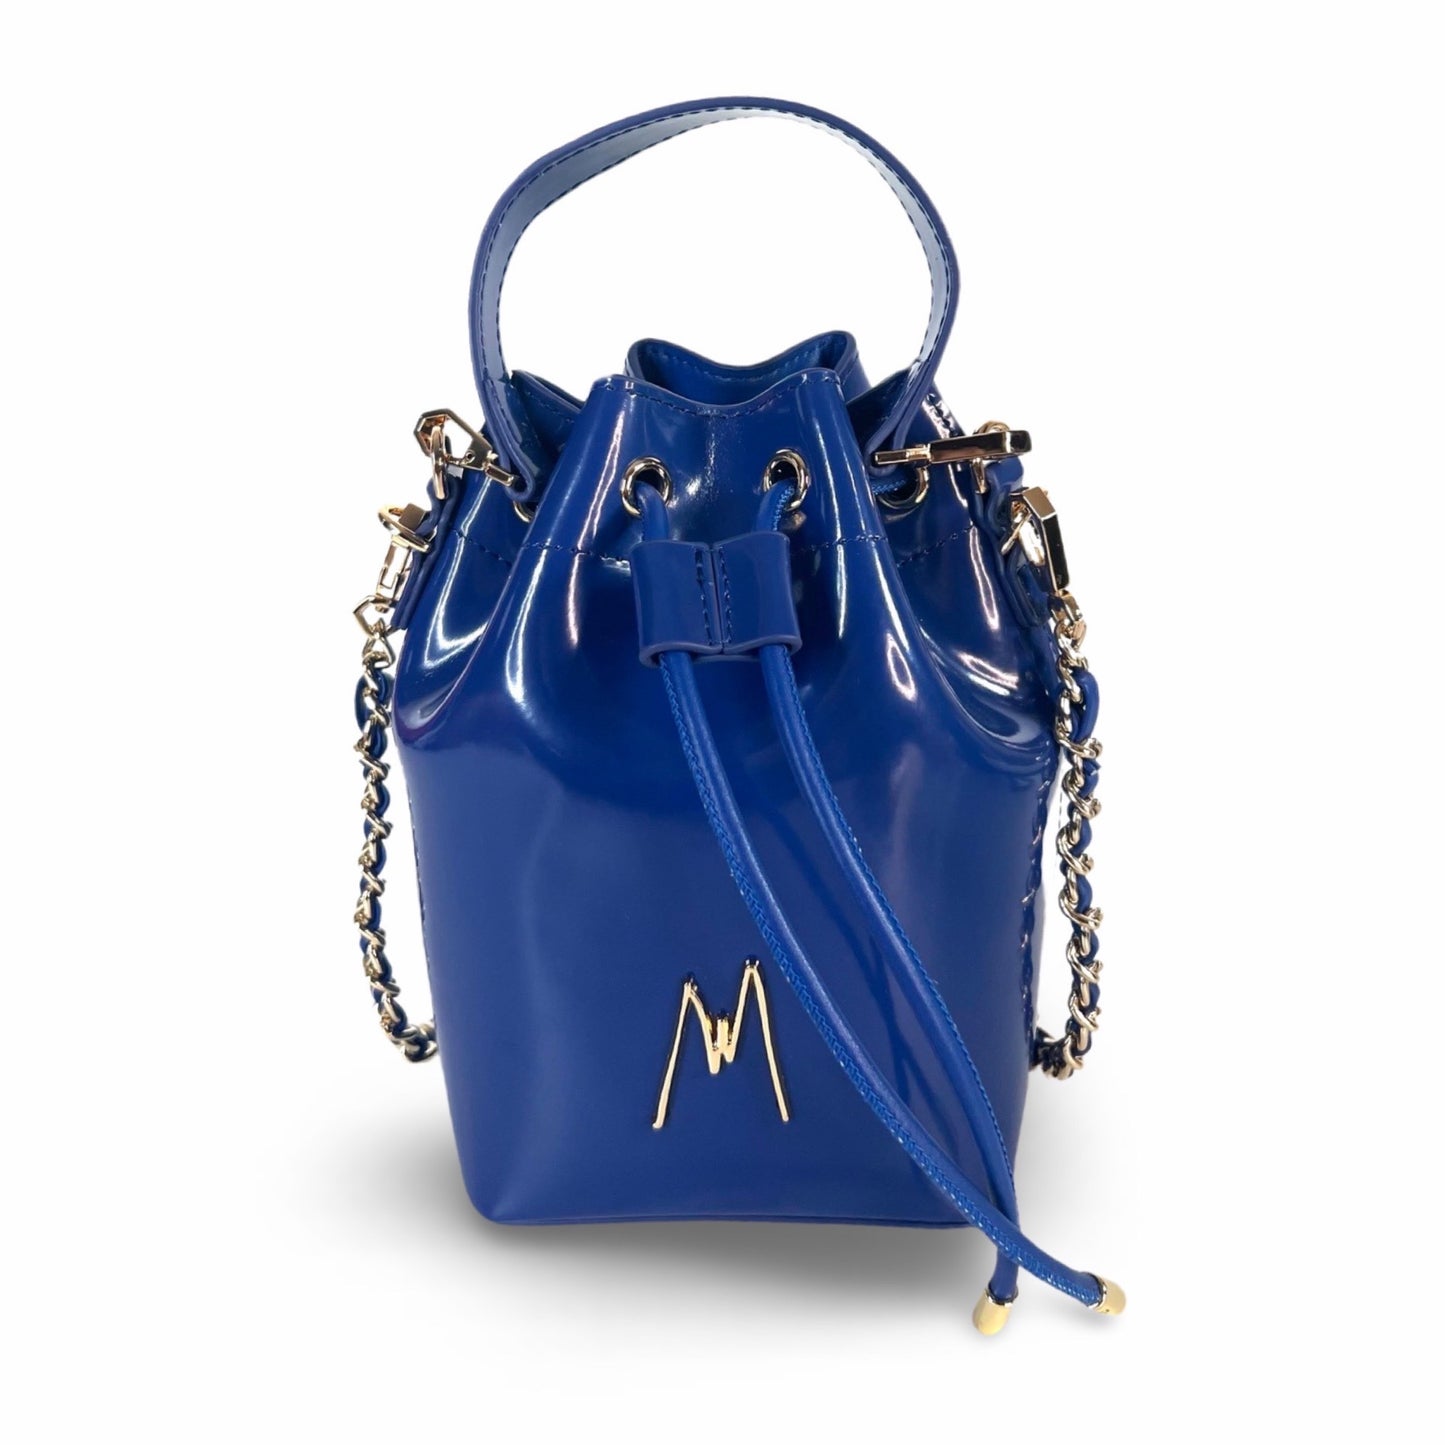 "THE BUCKET BAG" - Electric Blue Patent Leather